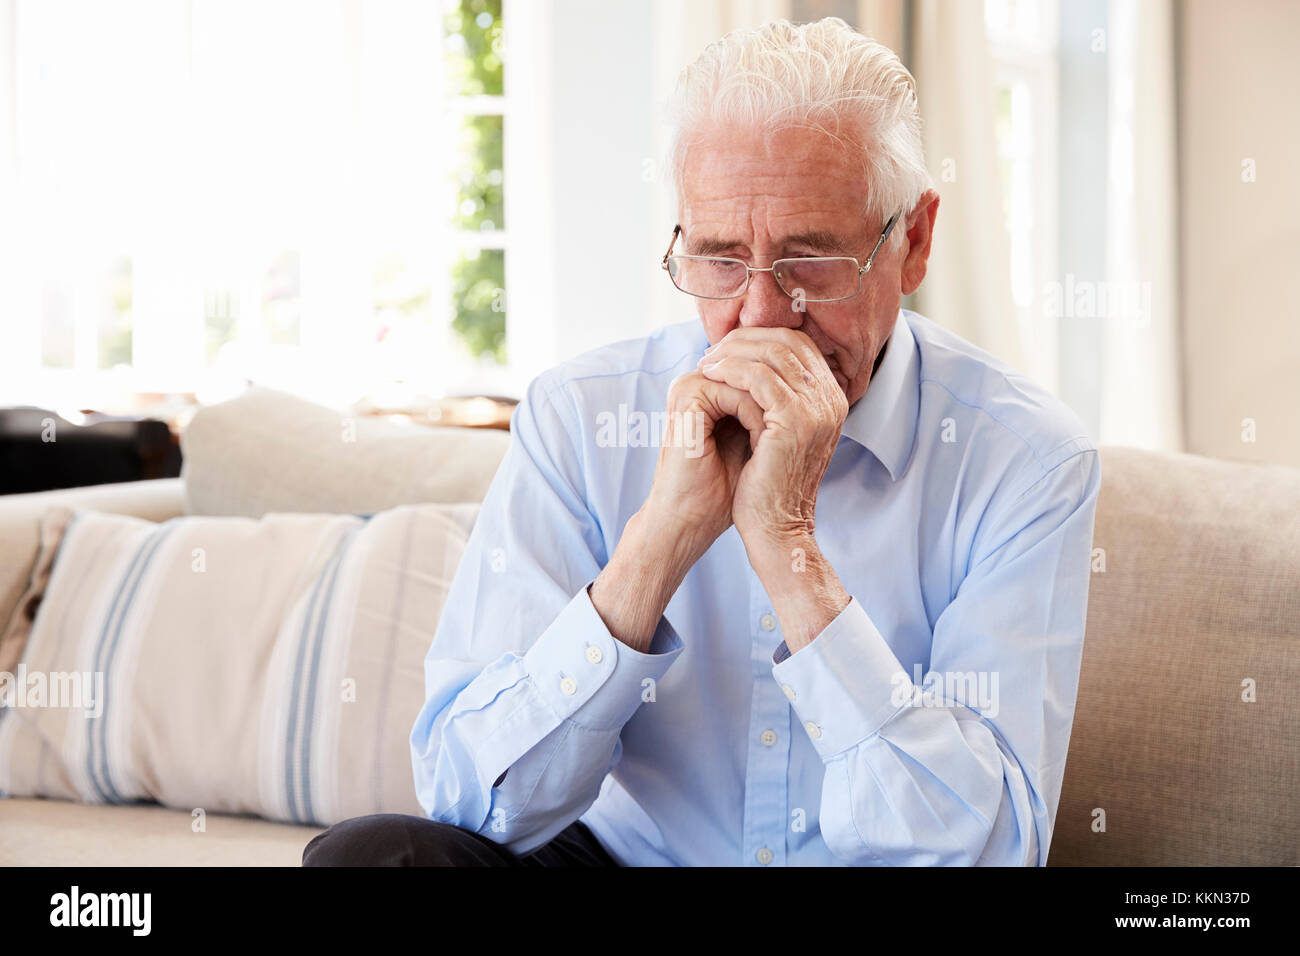 Senior Man Sitting On Sofa At Home Suffering From Depression Stock Photo